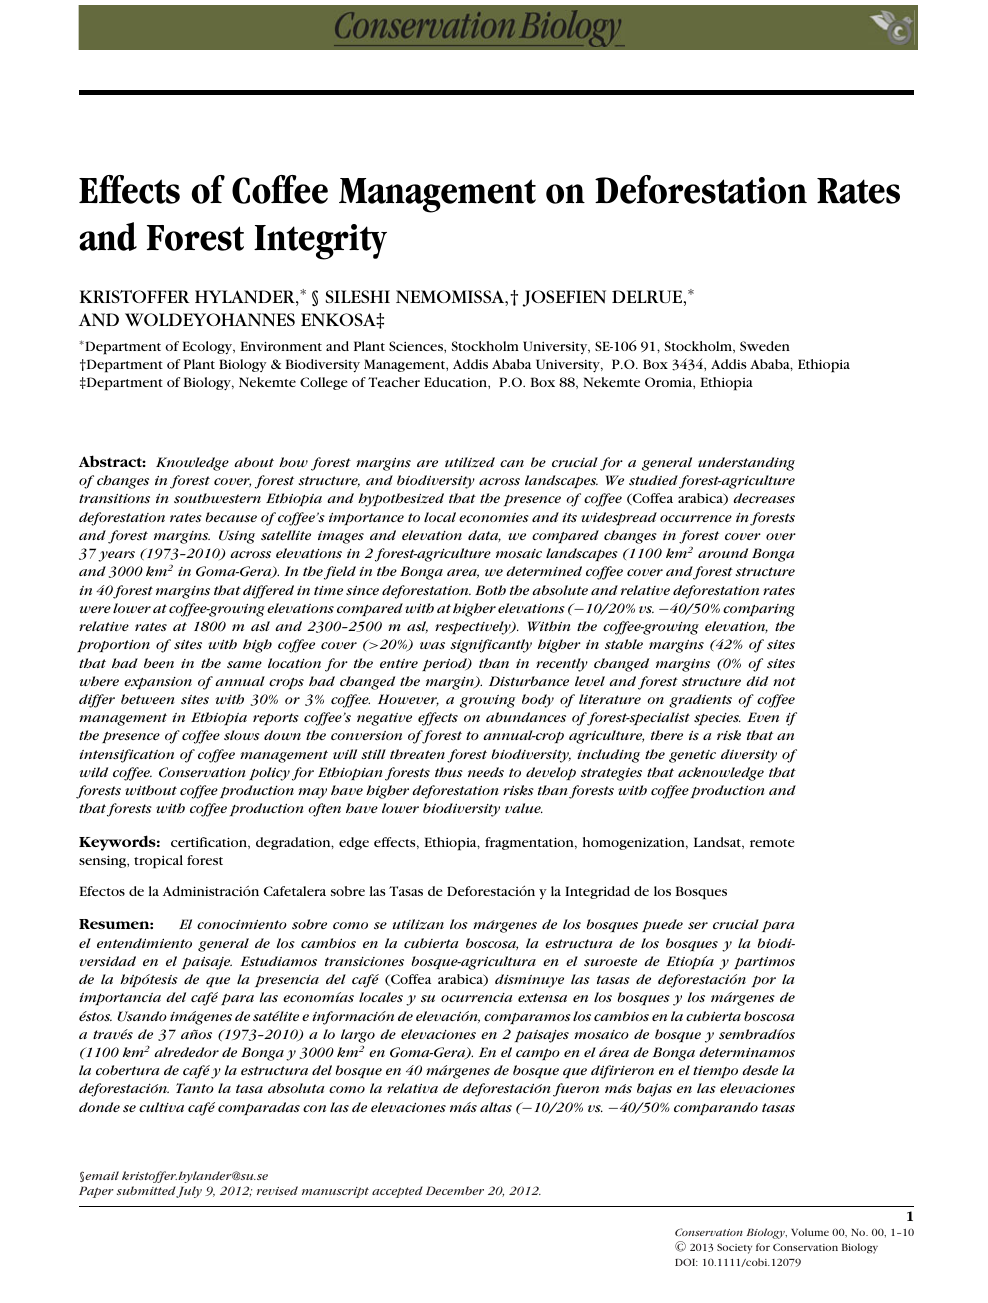 deforestation research paper